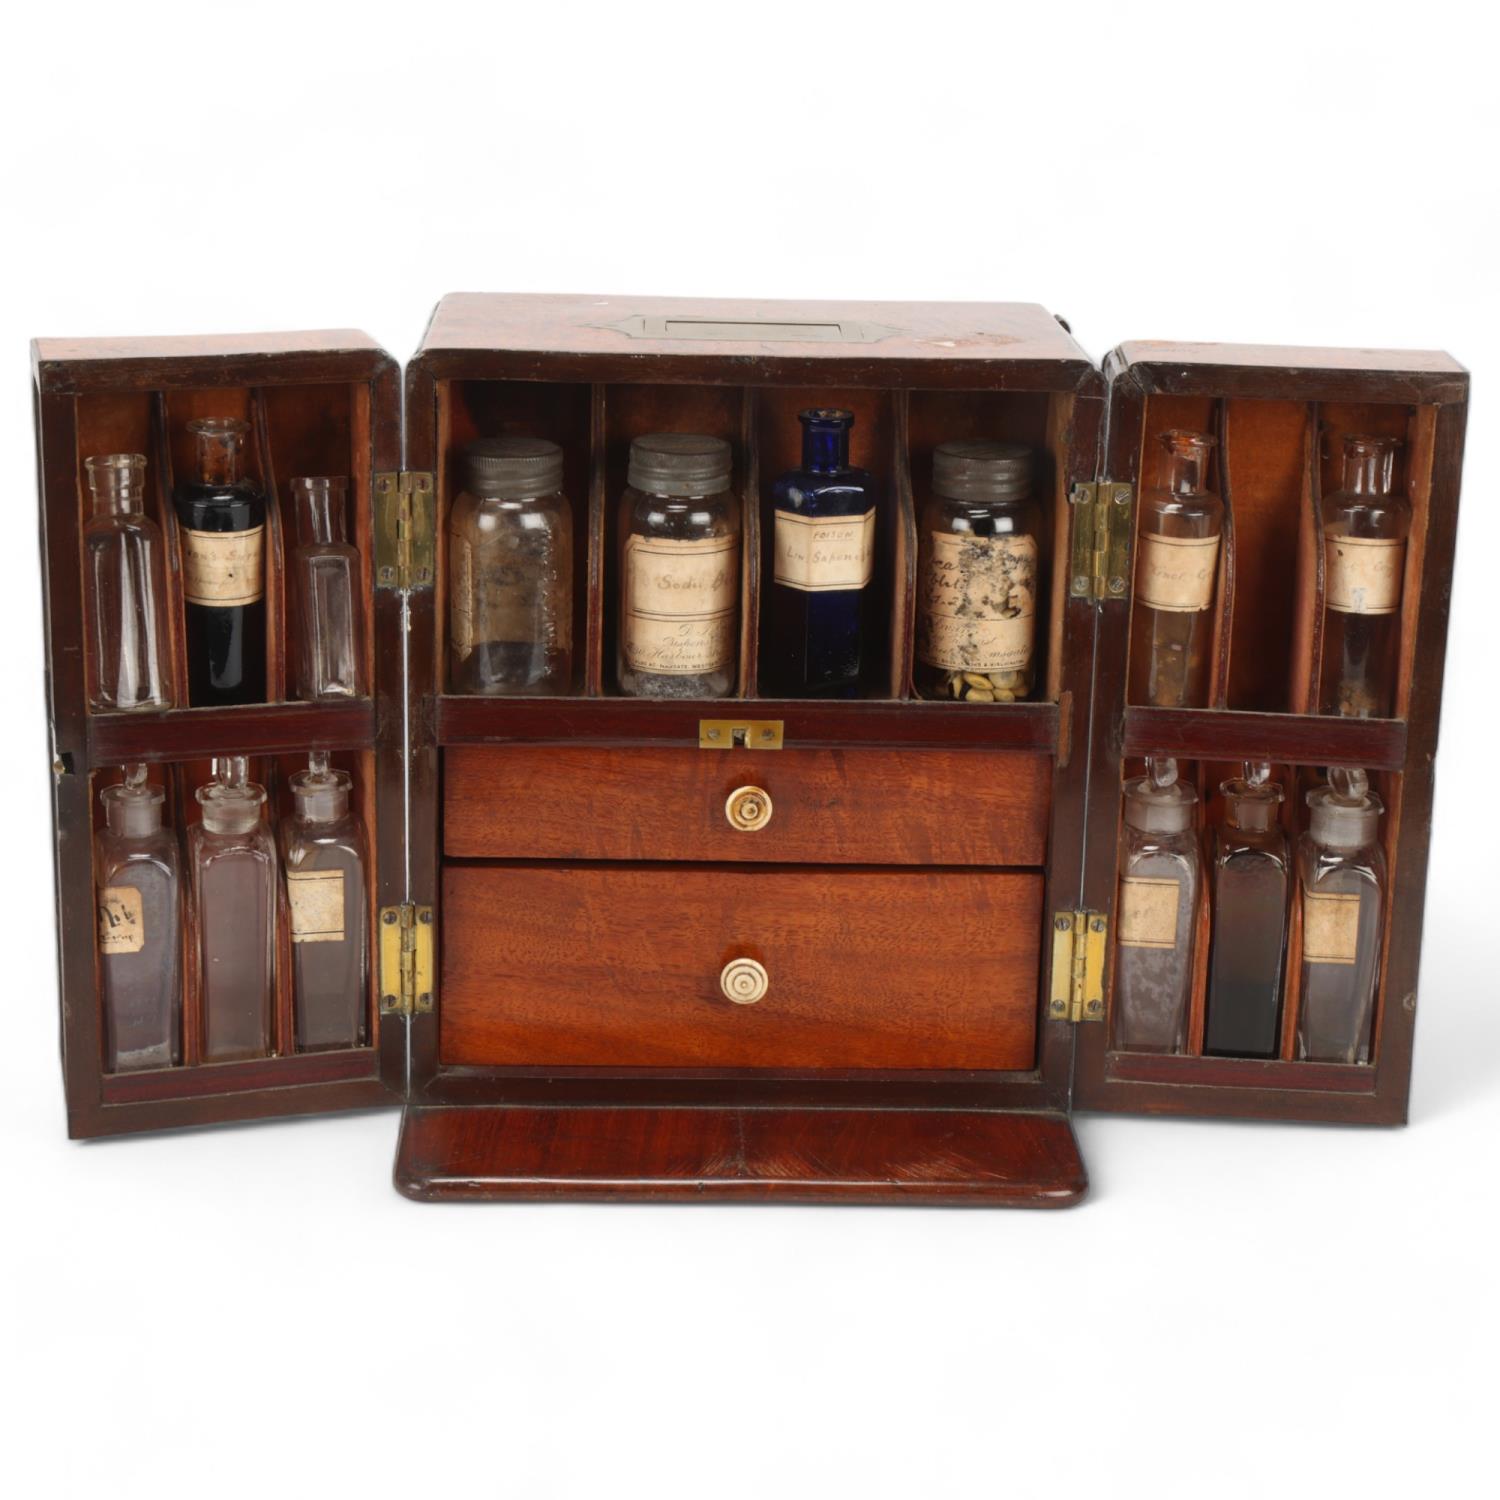 A 19th century mahogany apothecary box, recessed brass carrying handle, and fitted interior with 2